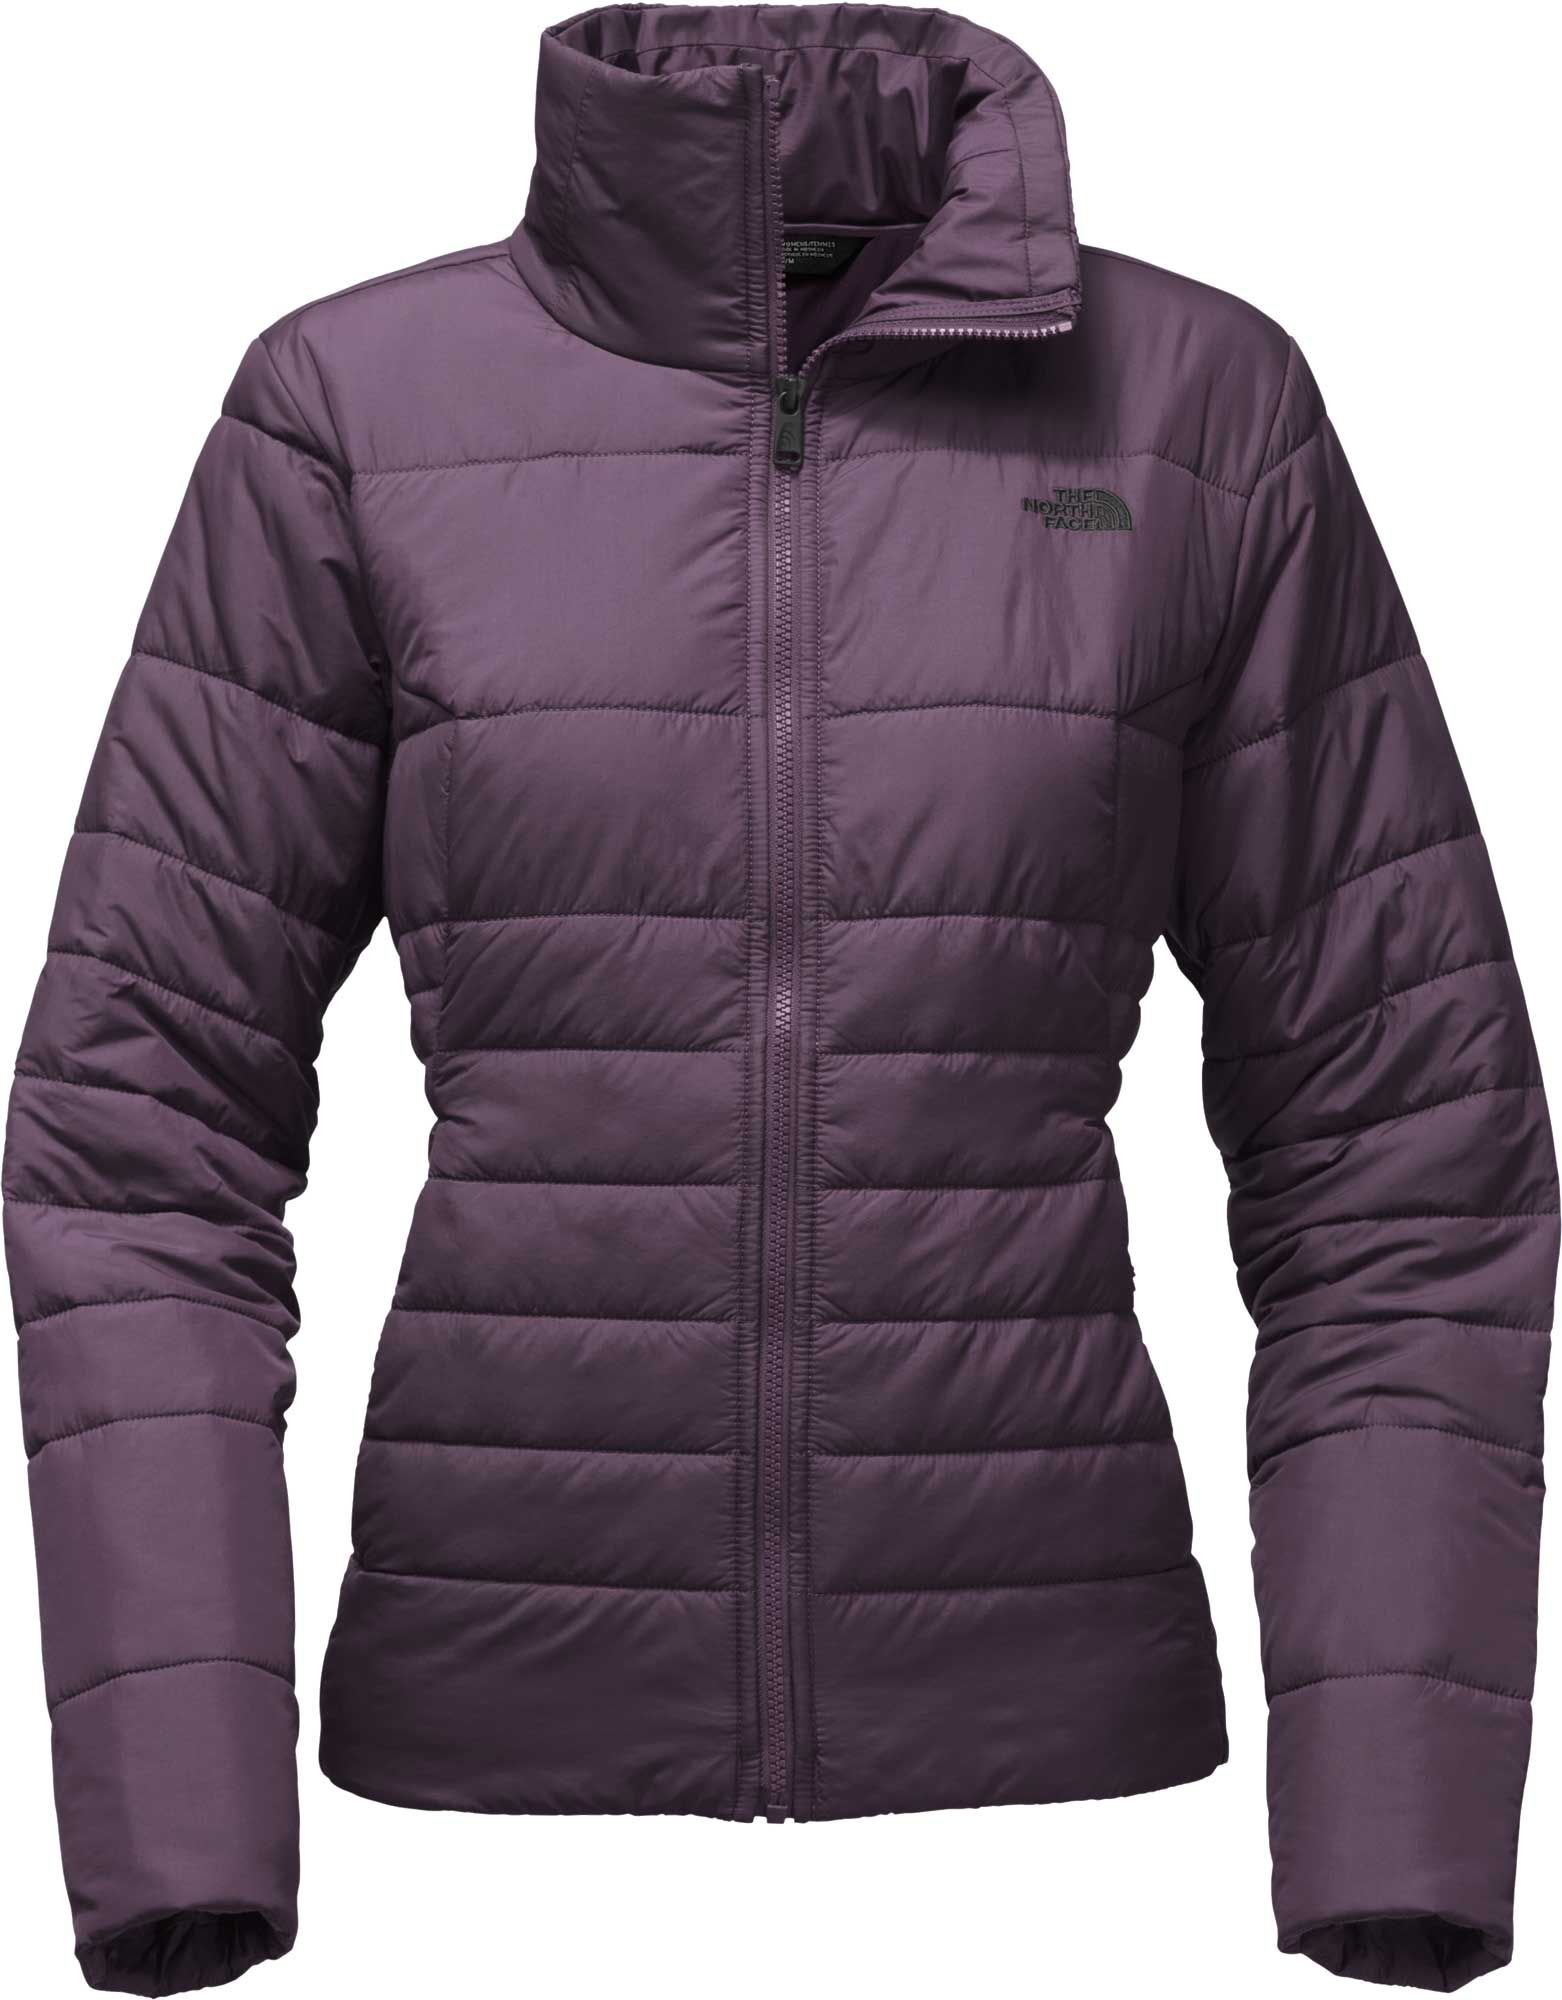 North face jackets on sale at dicks sporting goodsting goods